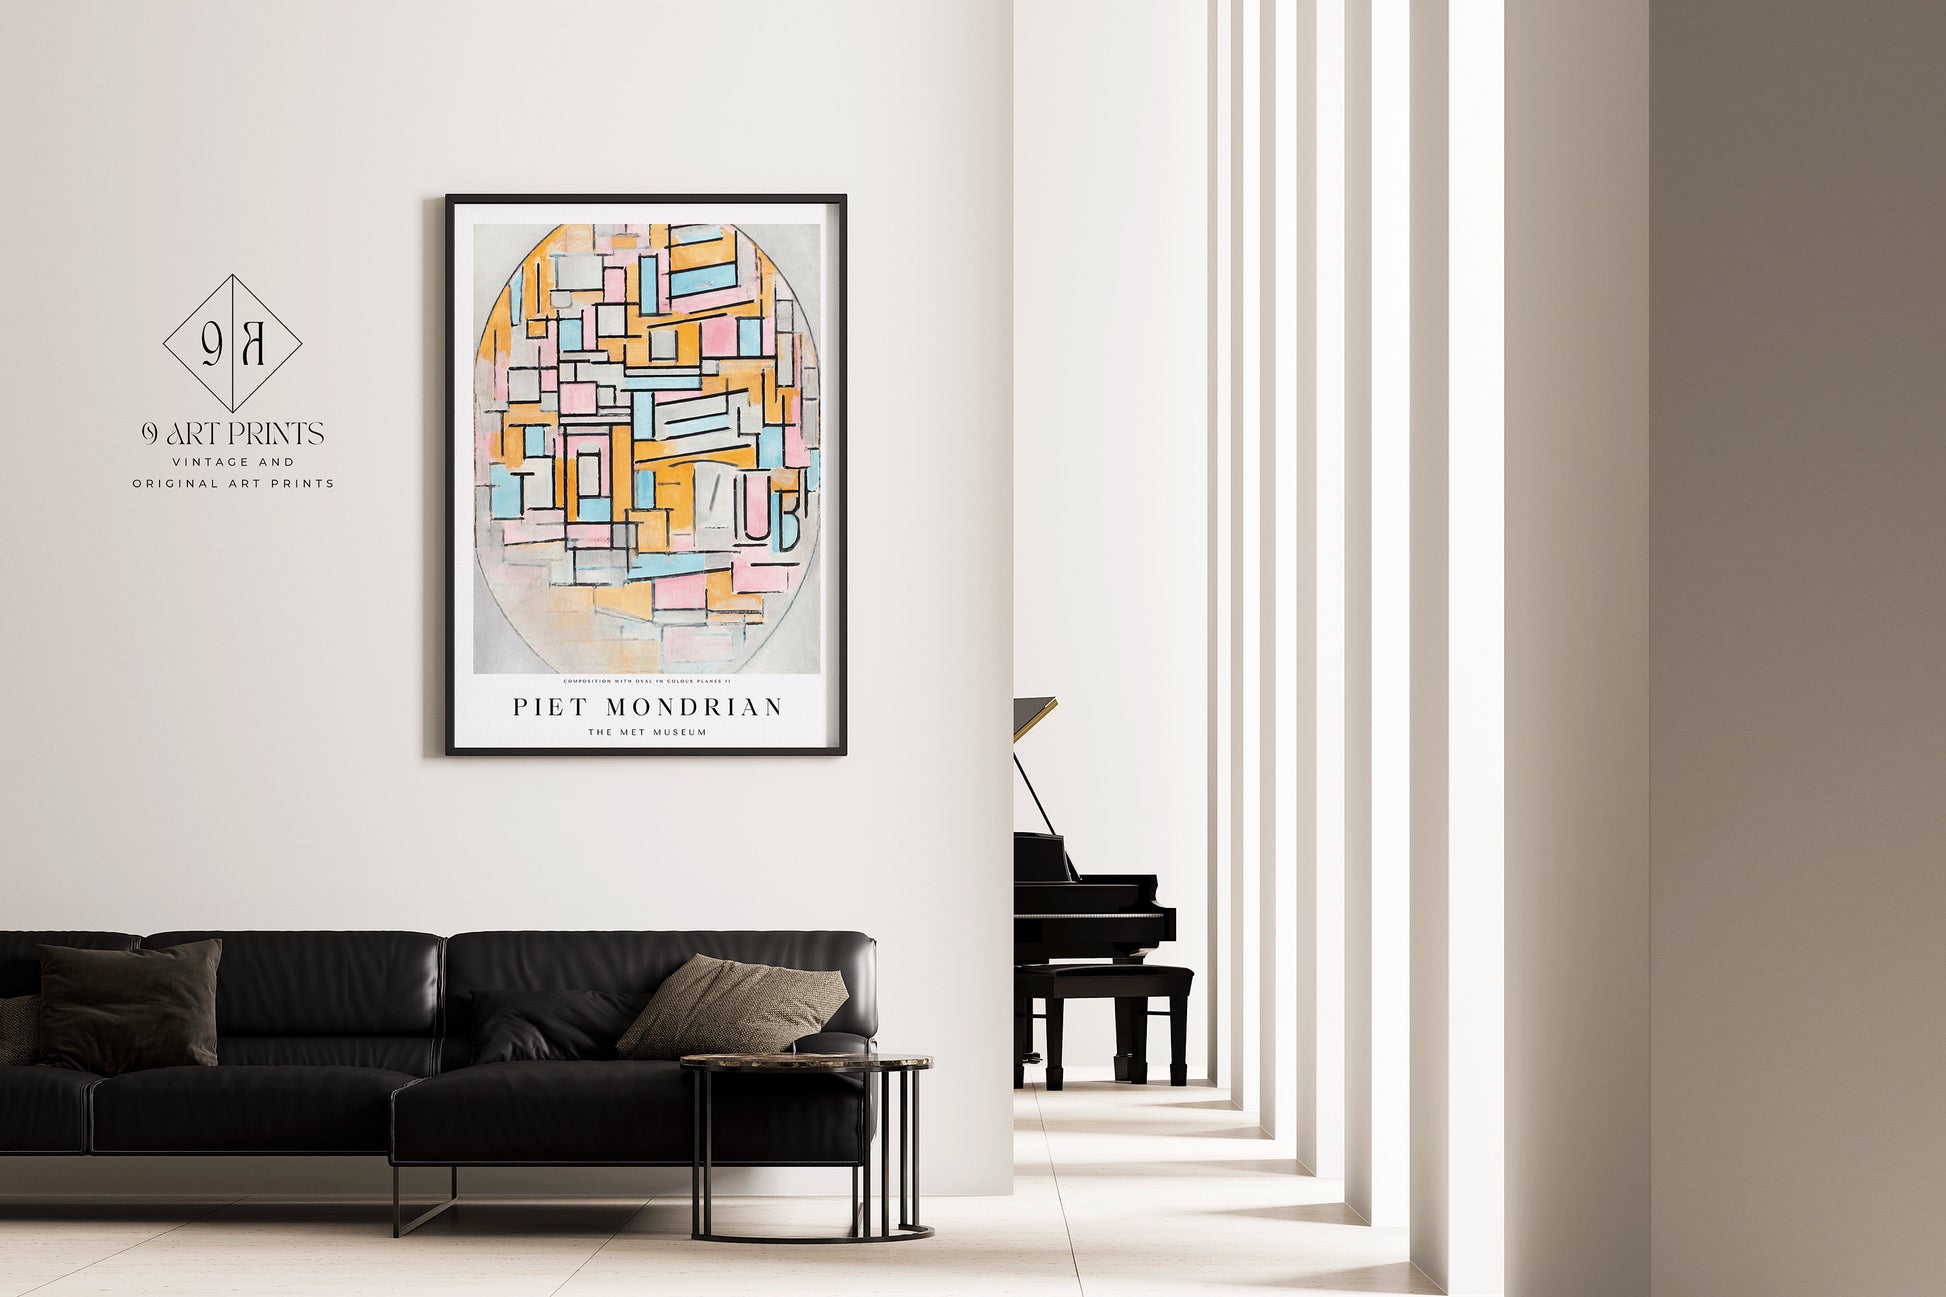 Piet Mondrian COMPOSITION OVAL Mid-Century Modern Art Print 60s Original Museum Colourful Minimalist Abstract Ready to hang Framed Decor